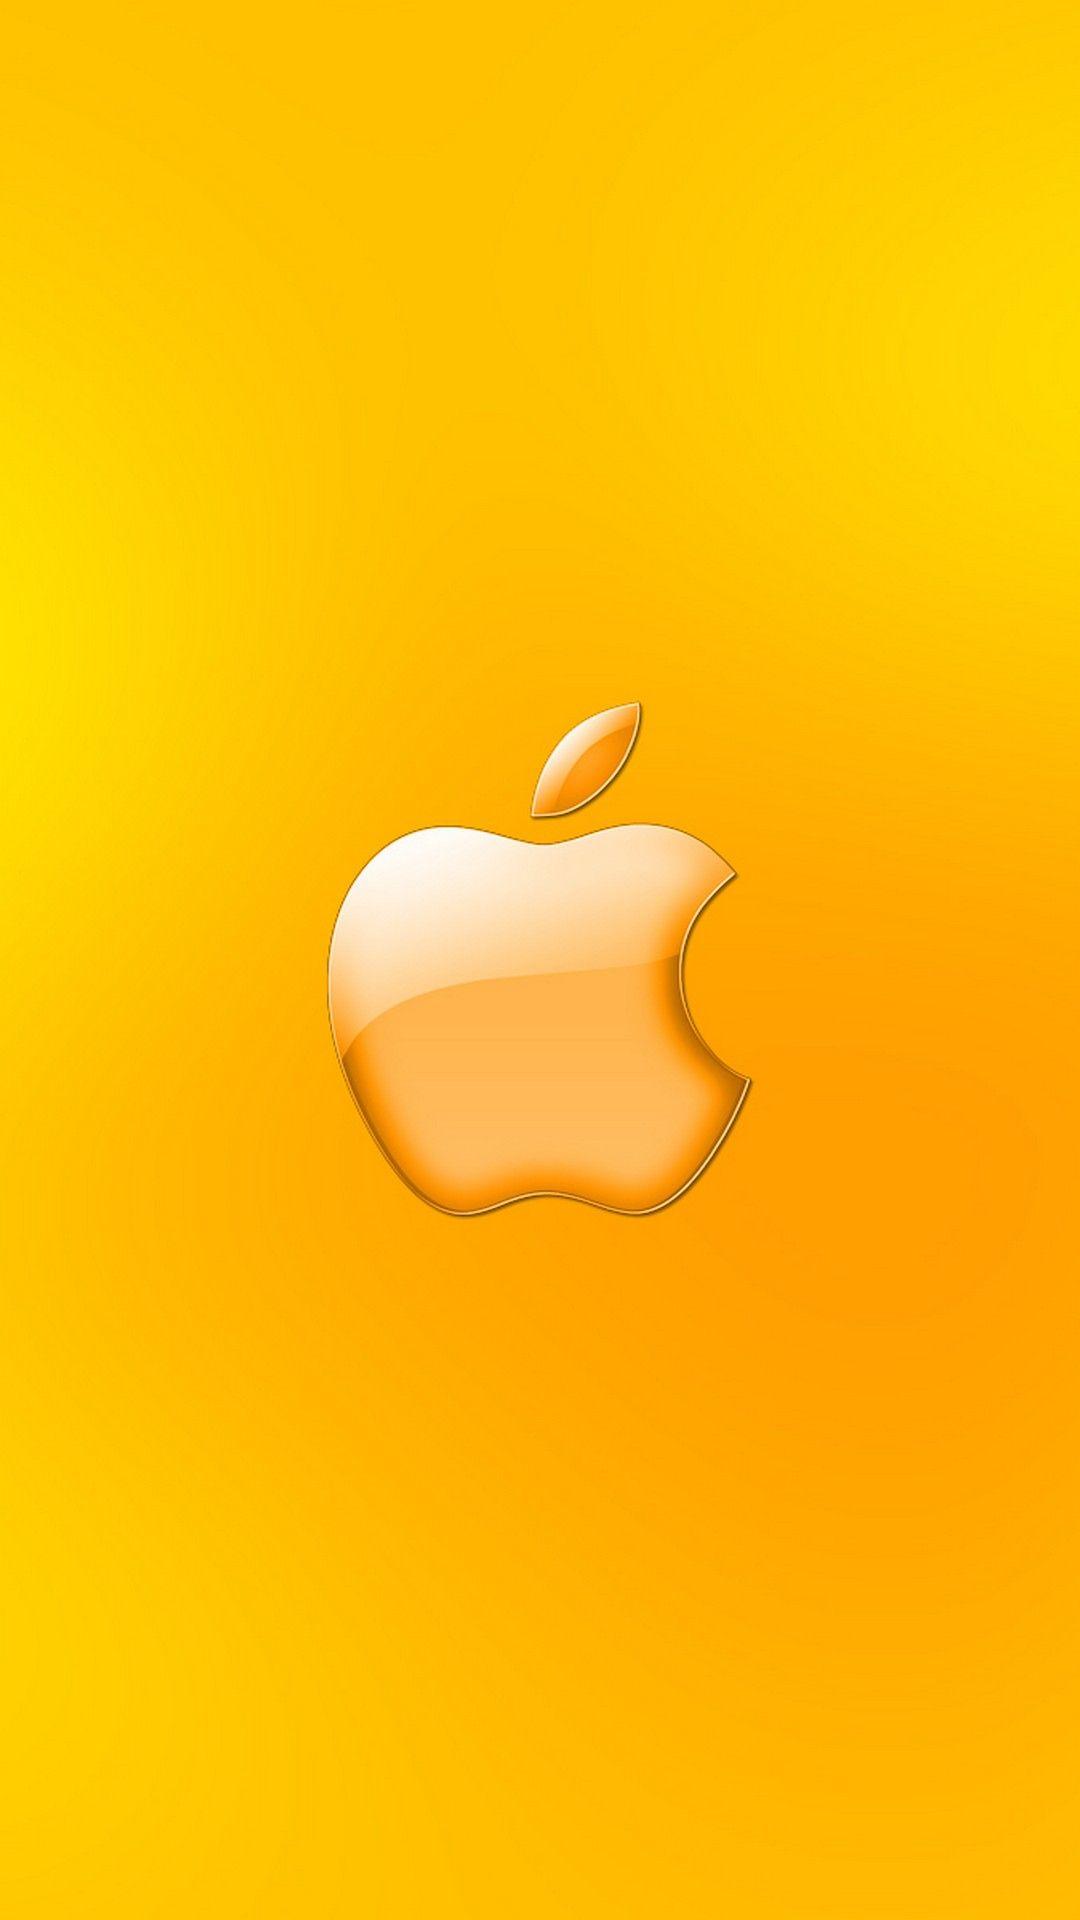 Apple Gold Logo For Android Wallpaper Android Wallpaper